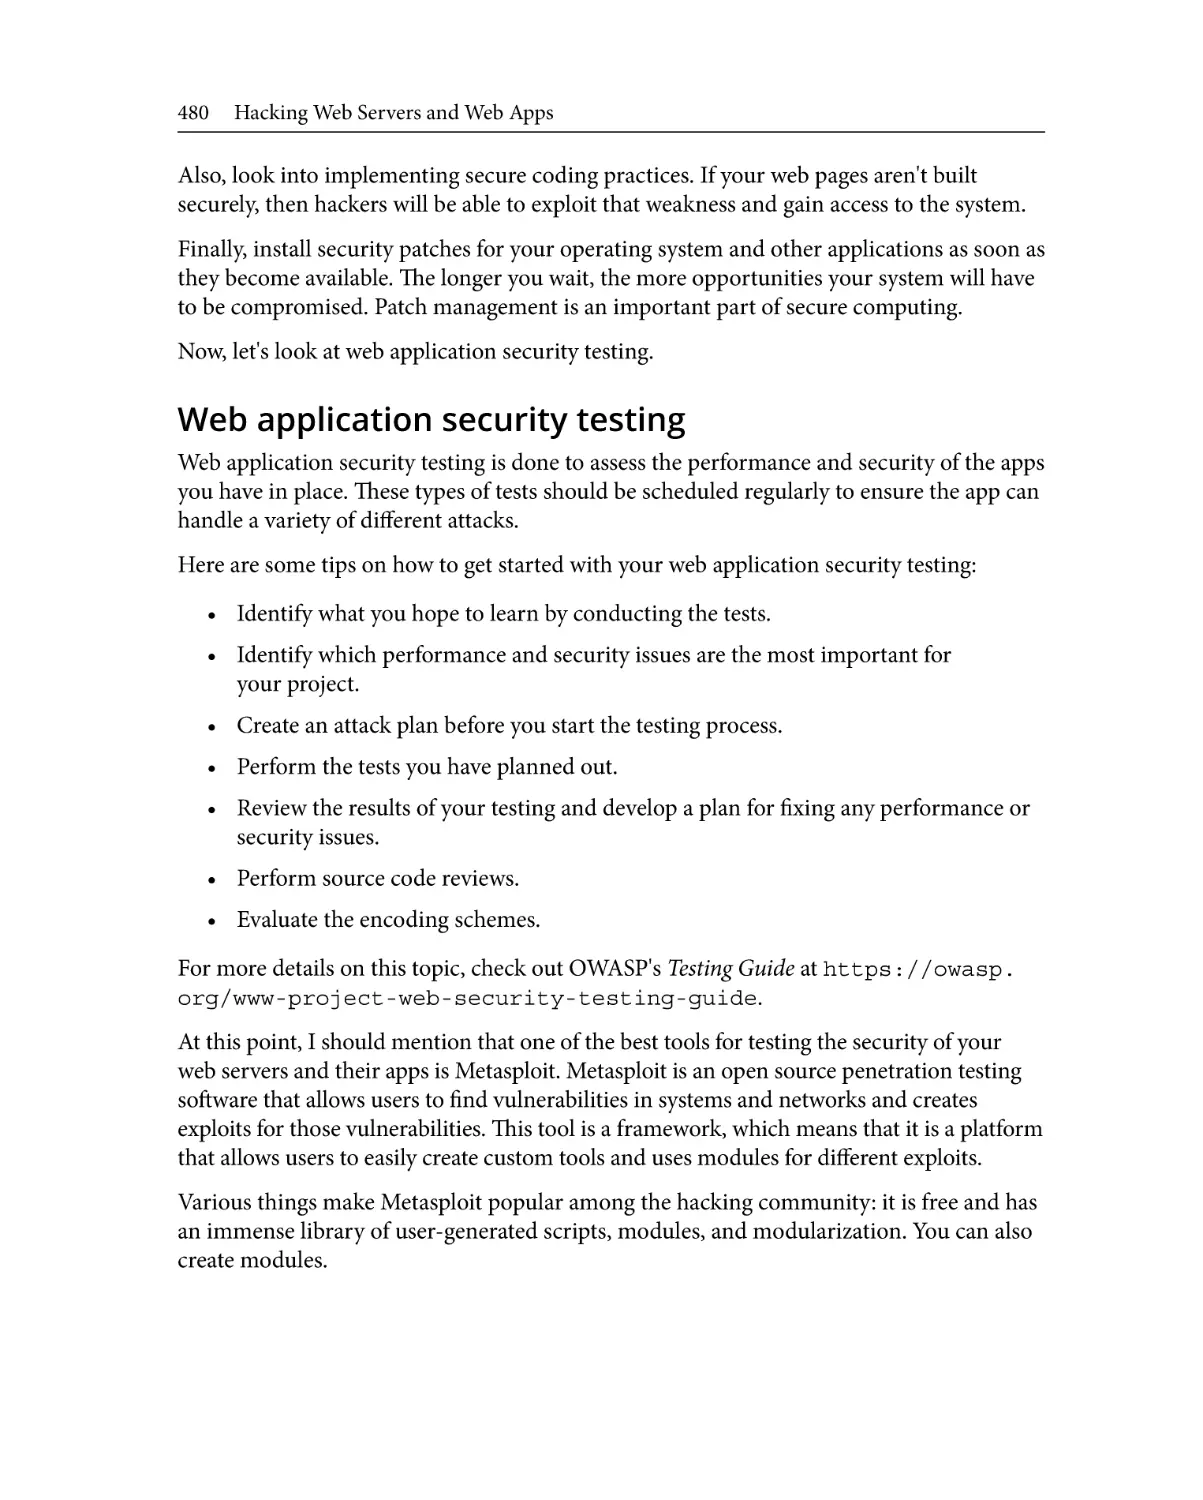 Web application security testing